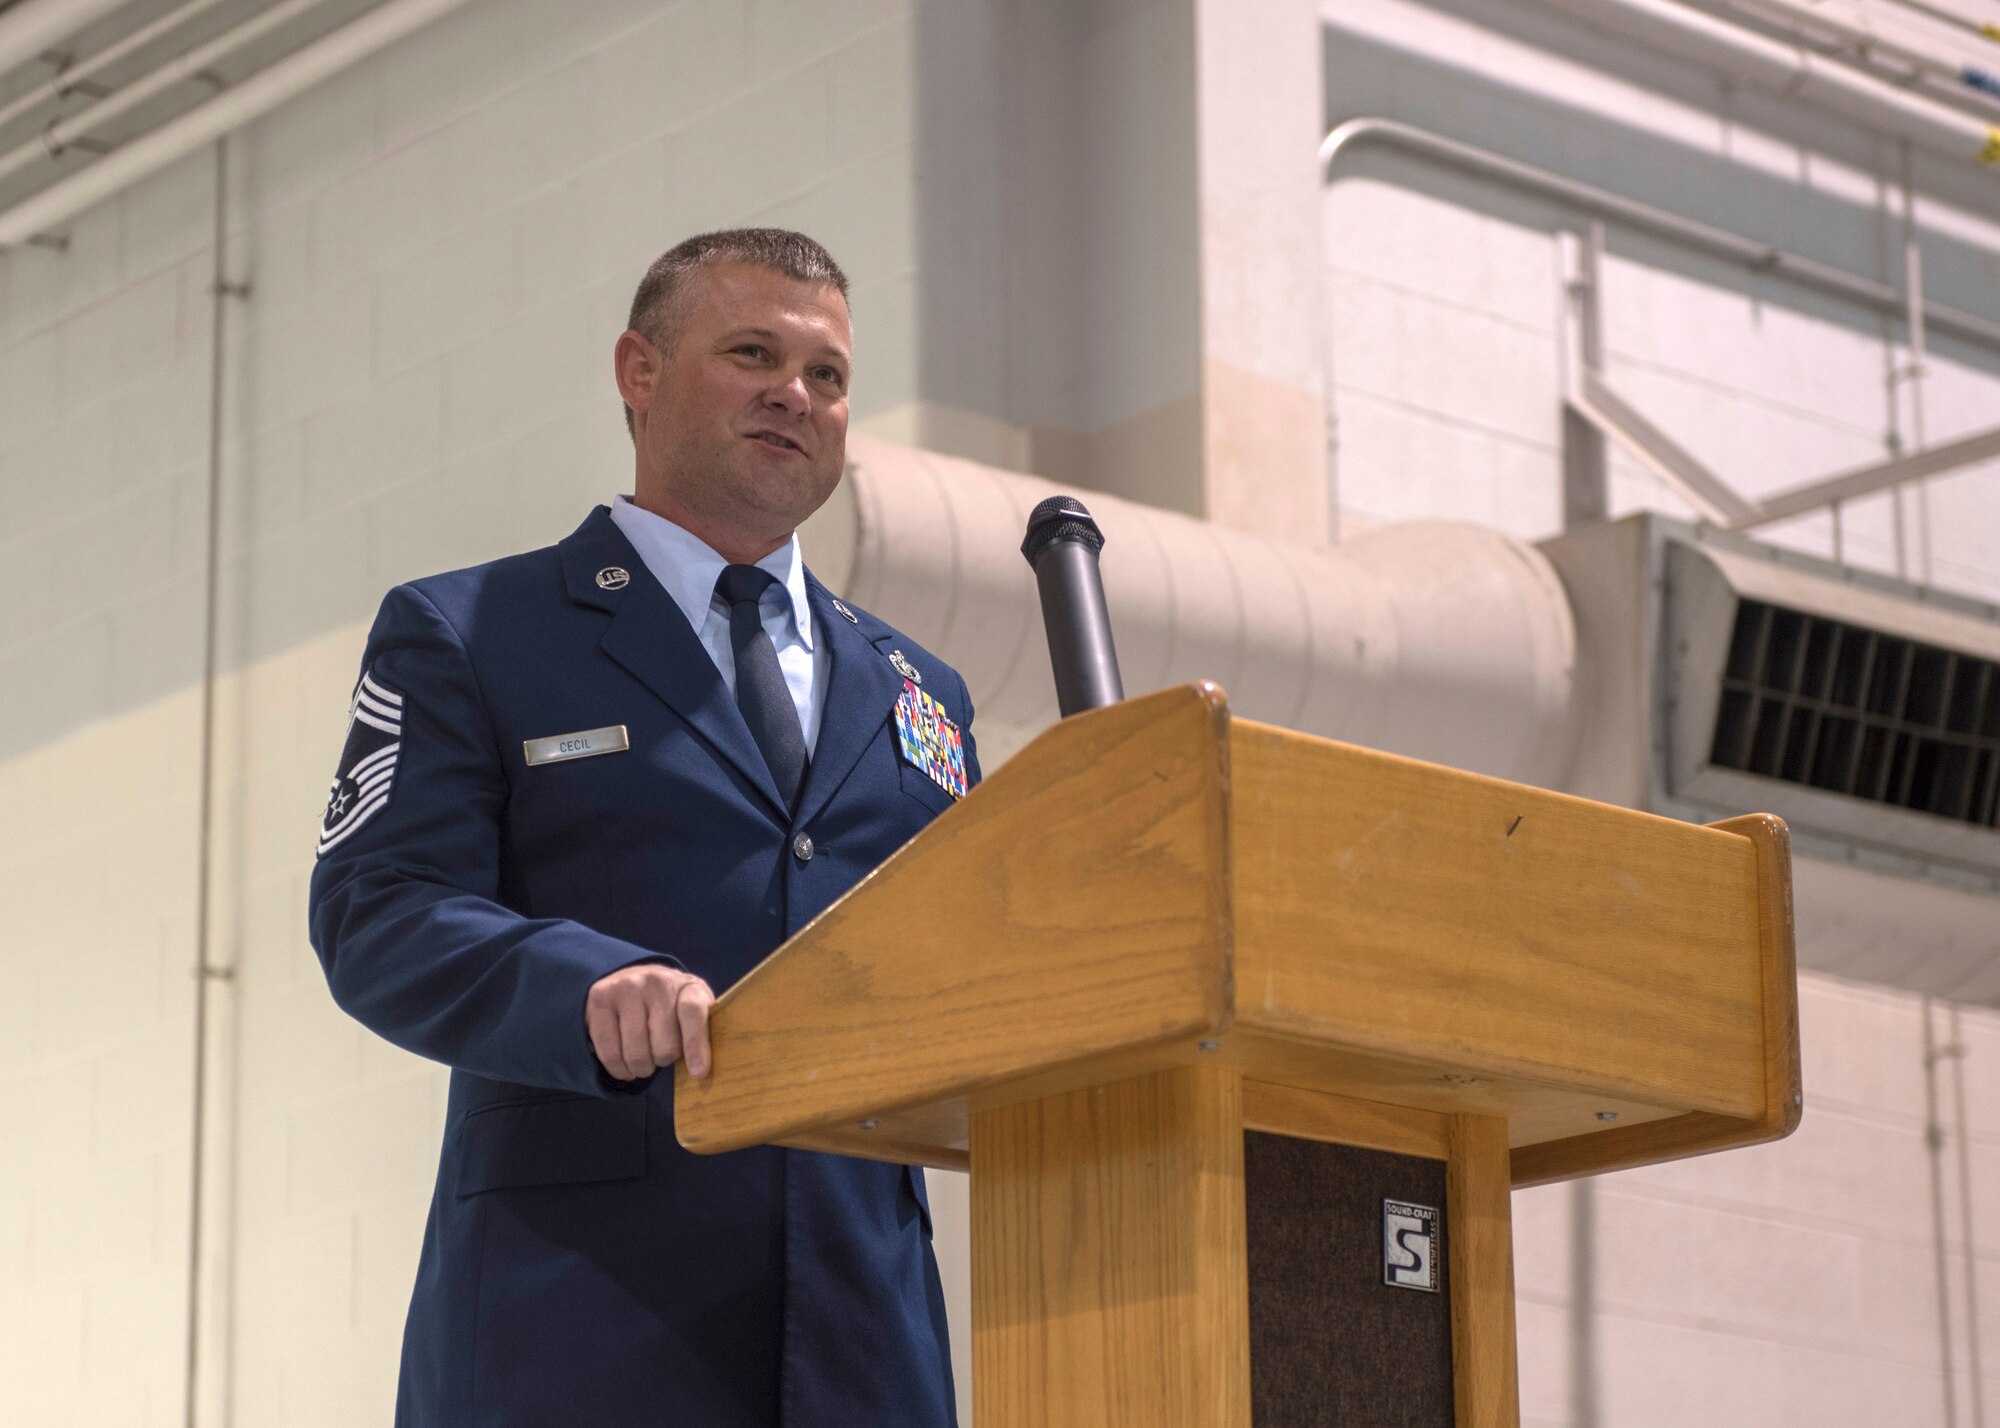 Chief Master Sgt. Shaun P. Cecil, chief enlisted manager for the 123rd Civil Engineer Squadron, speaks to audience members during his retirement ceremony April 10, 2021, at the Kentucky Air National Guard Base in Louisville, Ky. Cecil's career spanned 24 years. (U.S. Air National Guard photo by Staff Sgt. Clayton Wear)